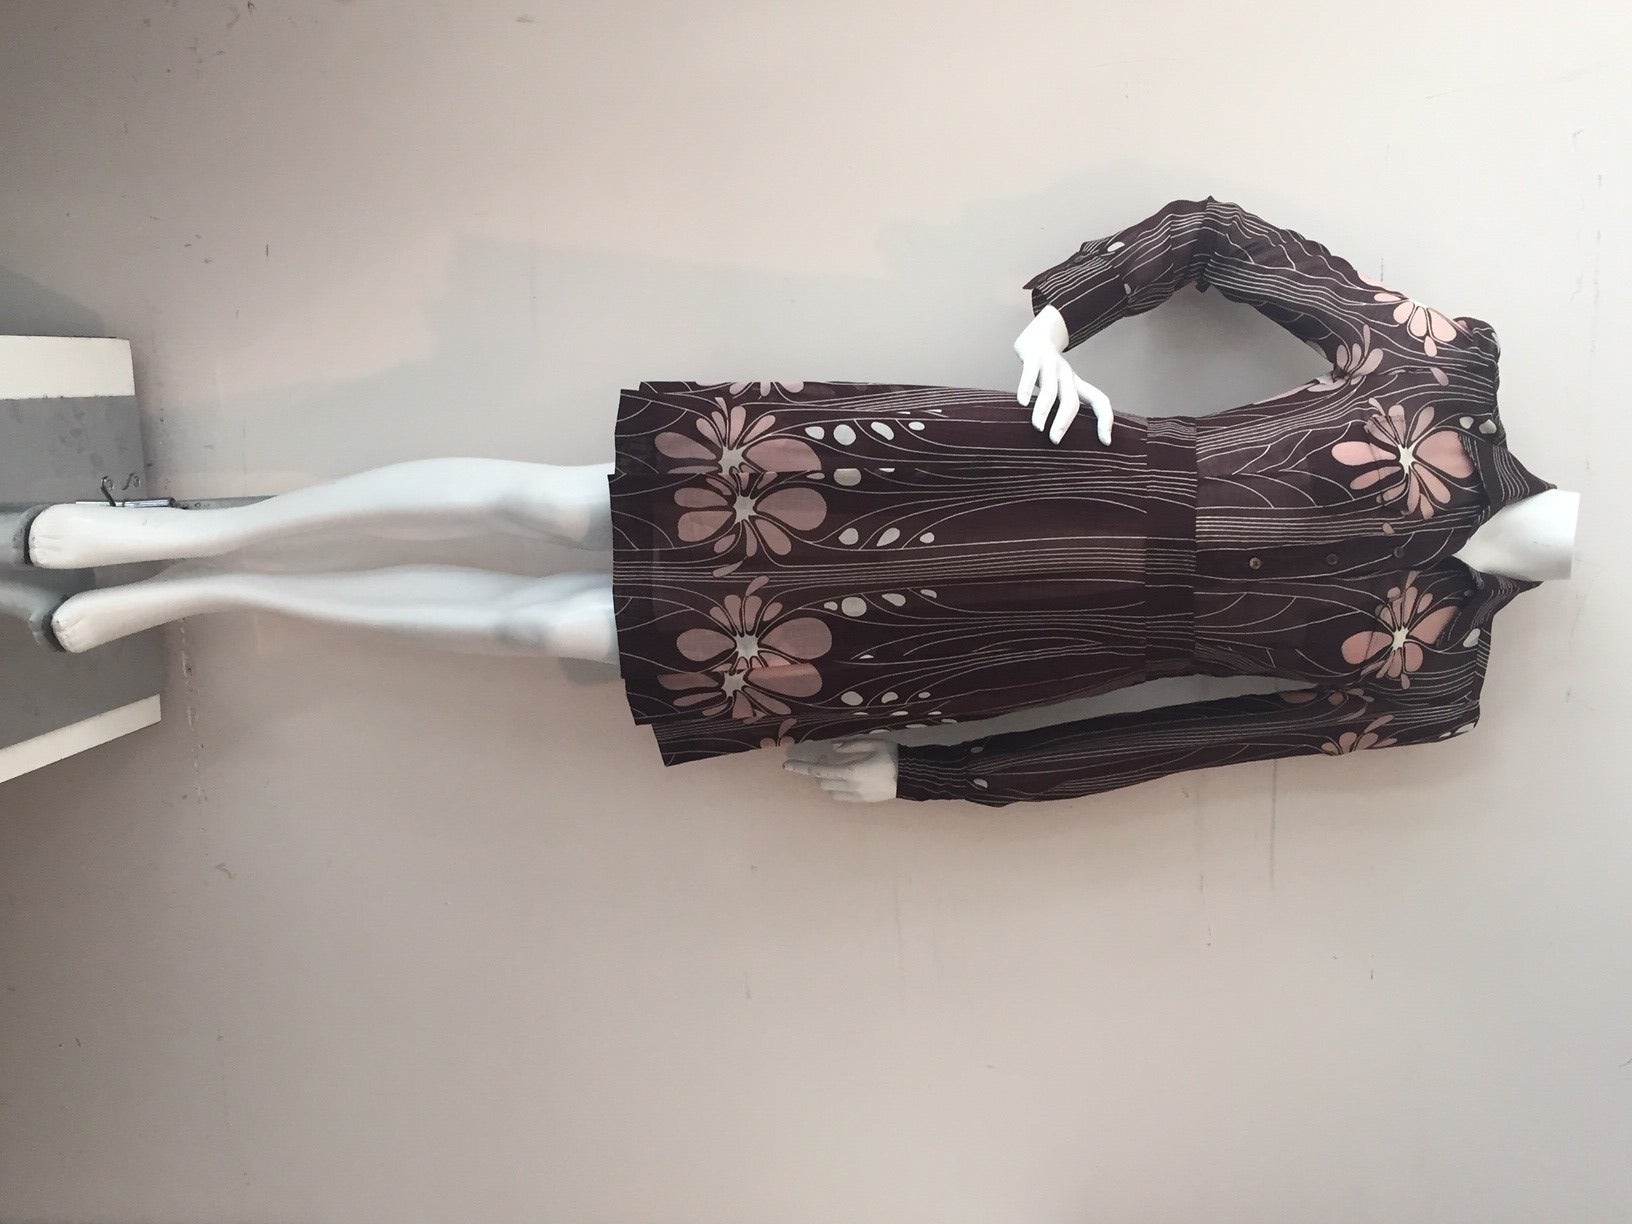 A fun 1990s Miu Miu Shirtfront dress in brown and pink lightweight wool gauze.  Cuffs and pockets at front of shirt.  Pleated skirt.